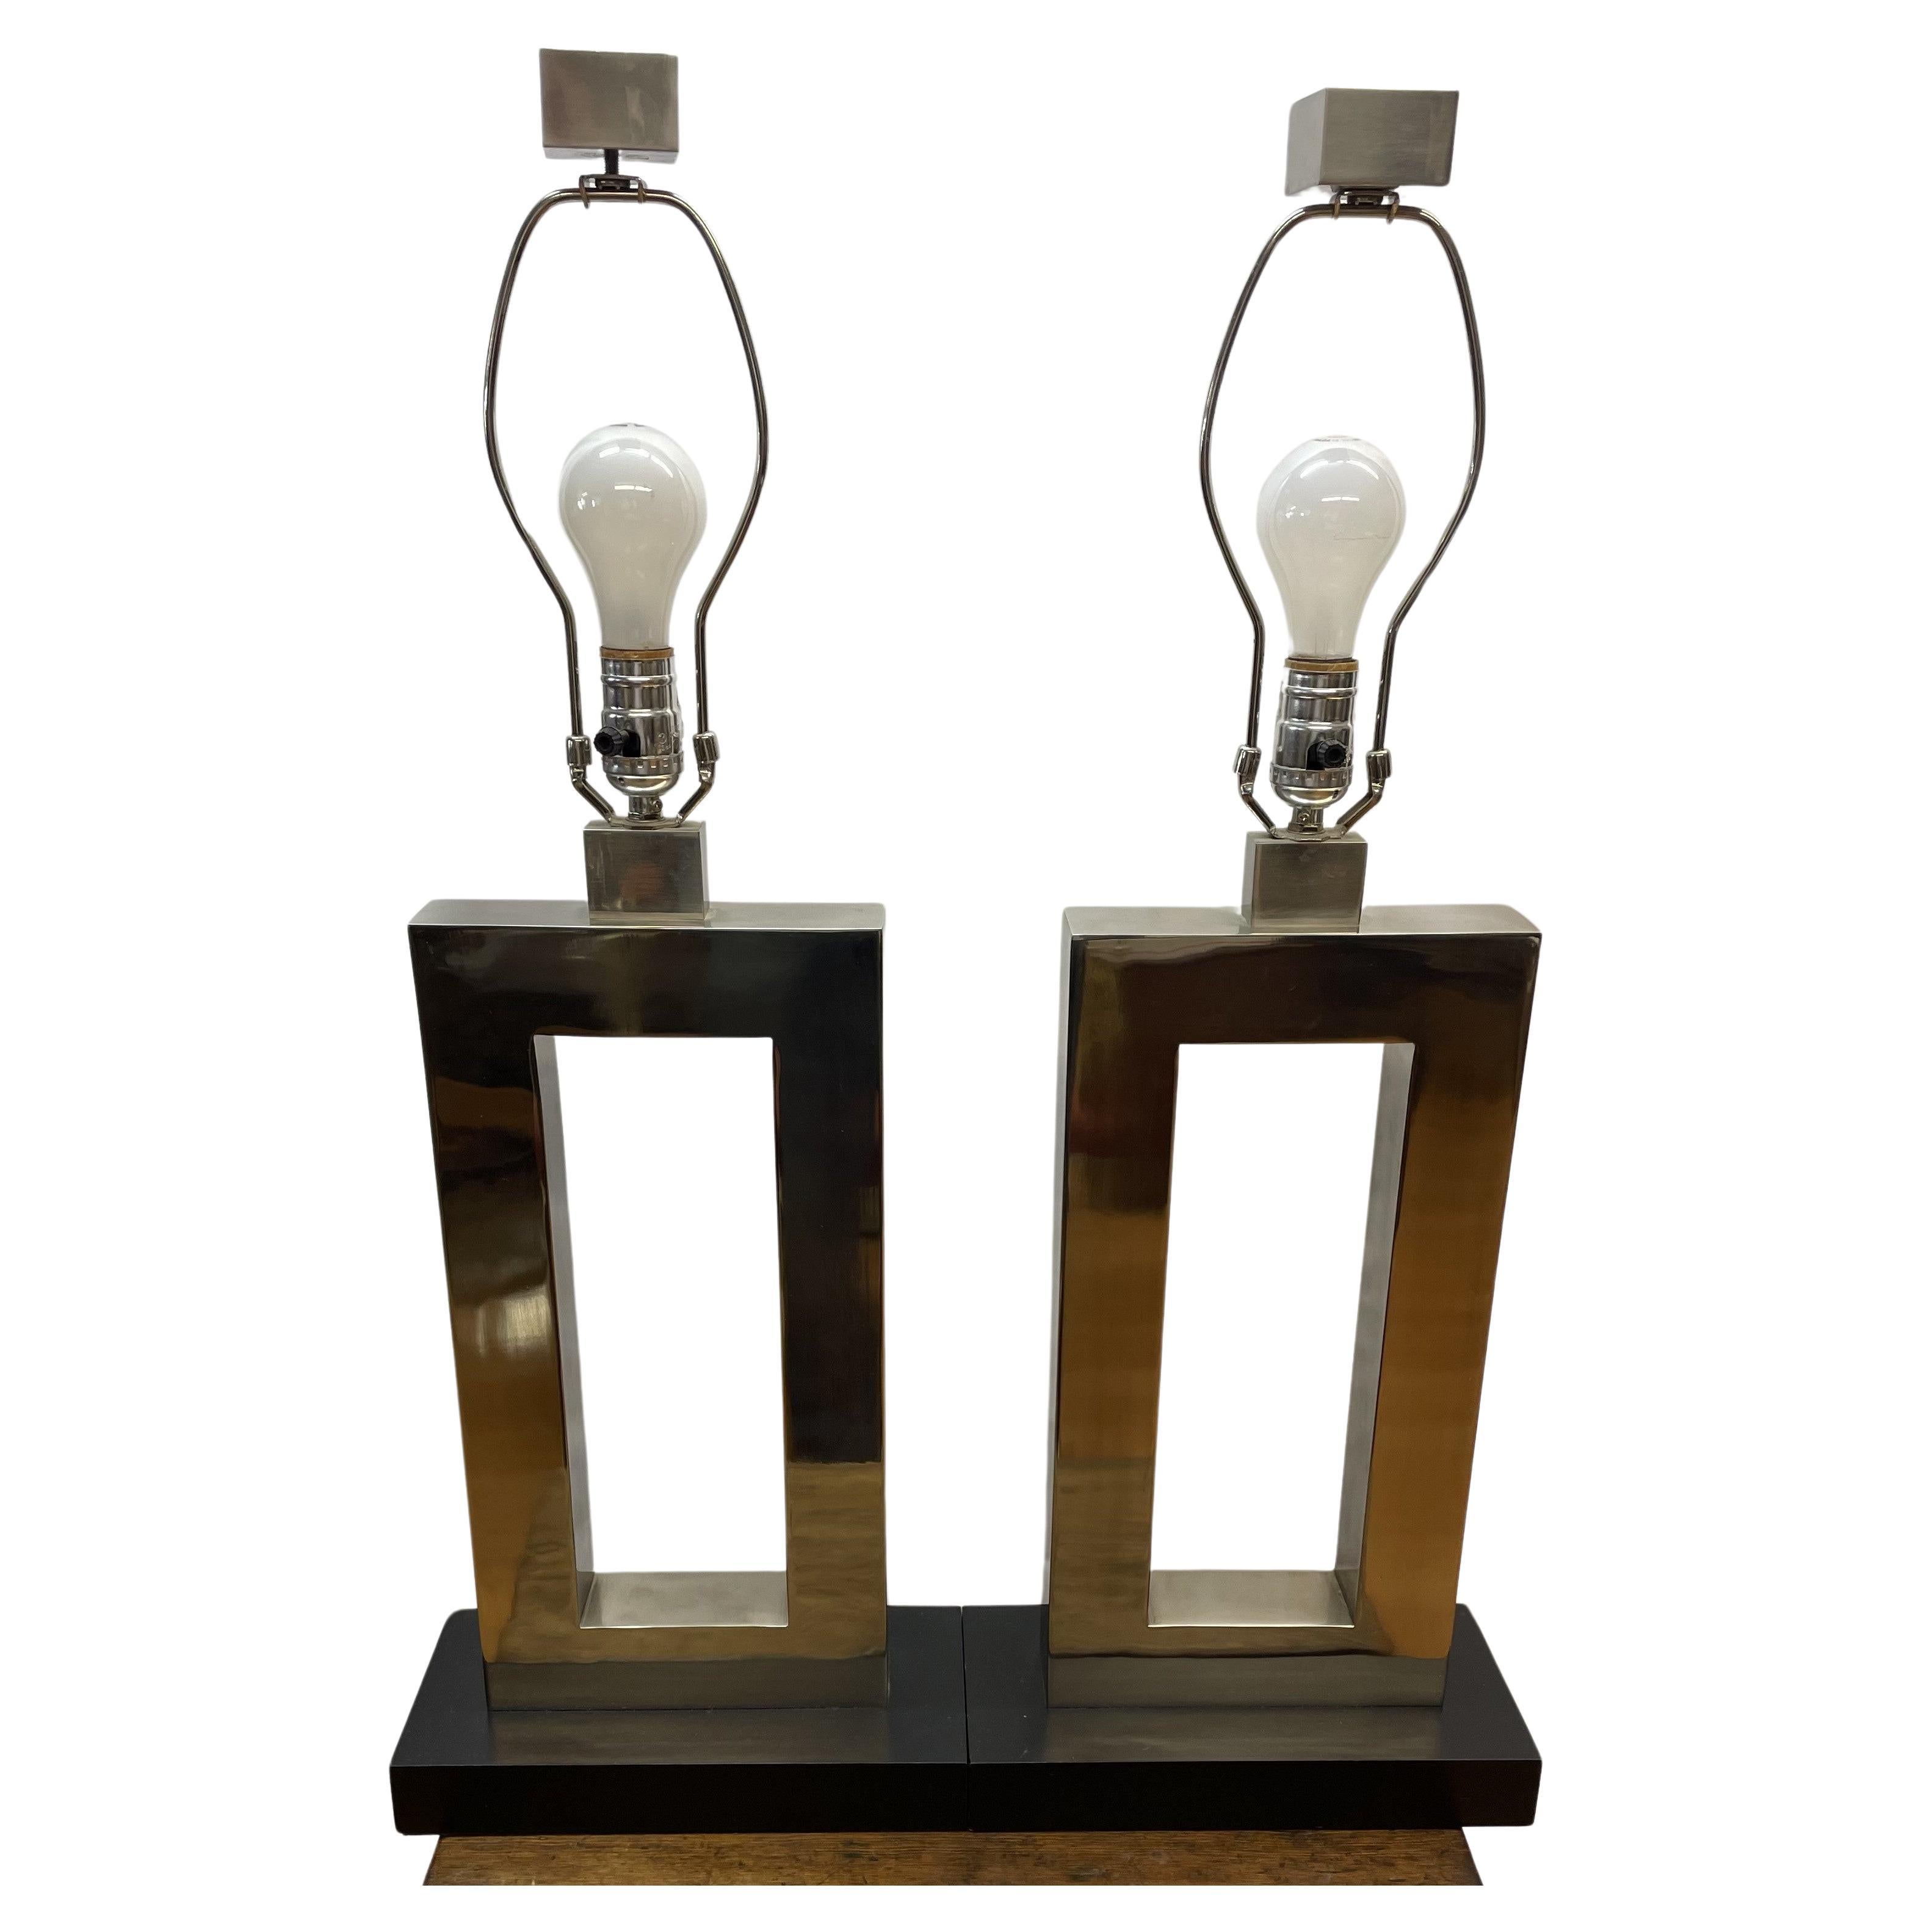 Pair of Robert Abppy brass table lamps with shades